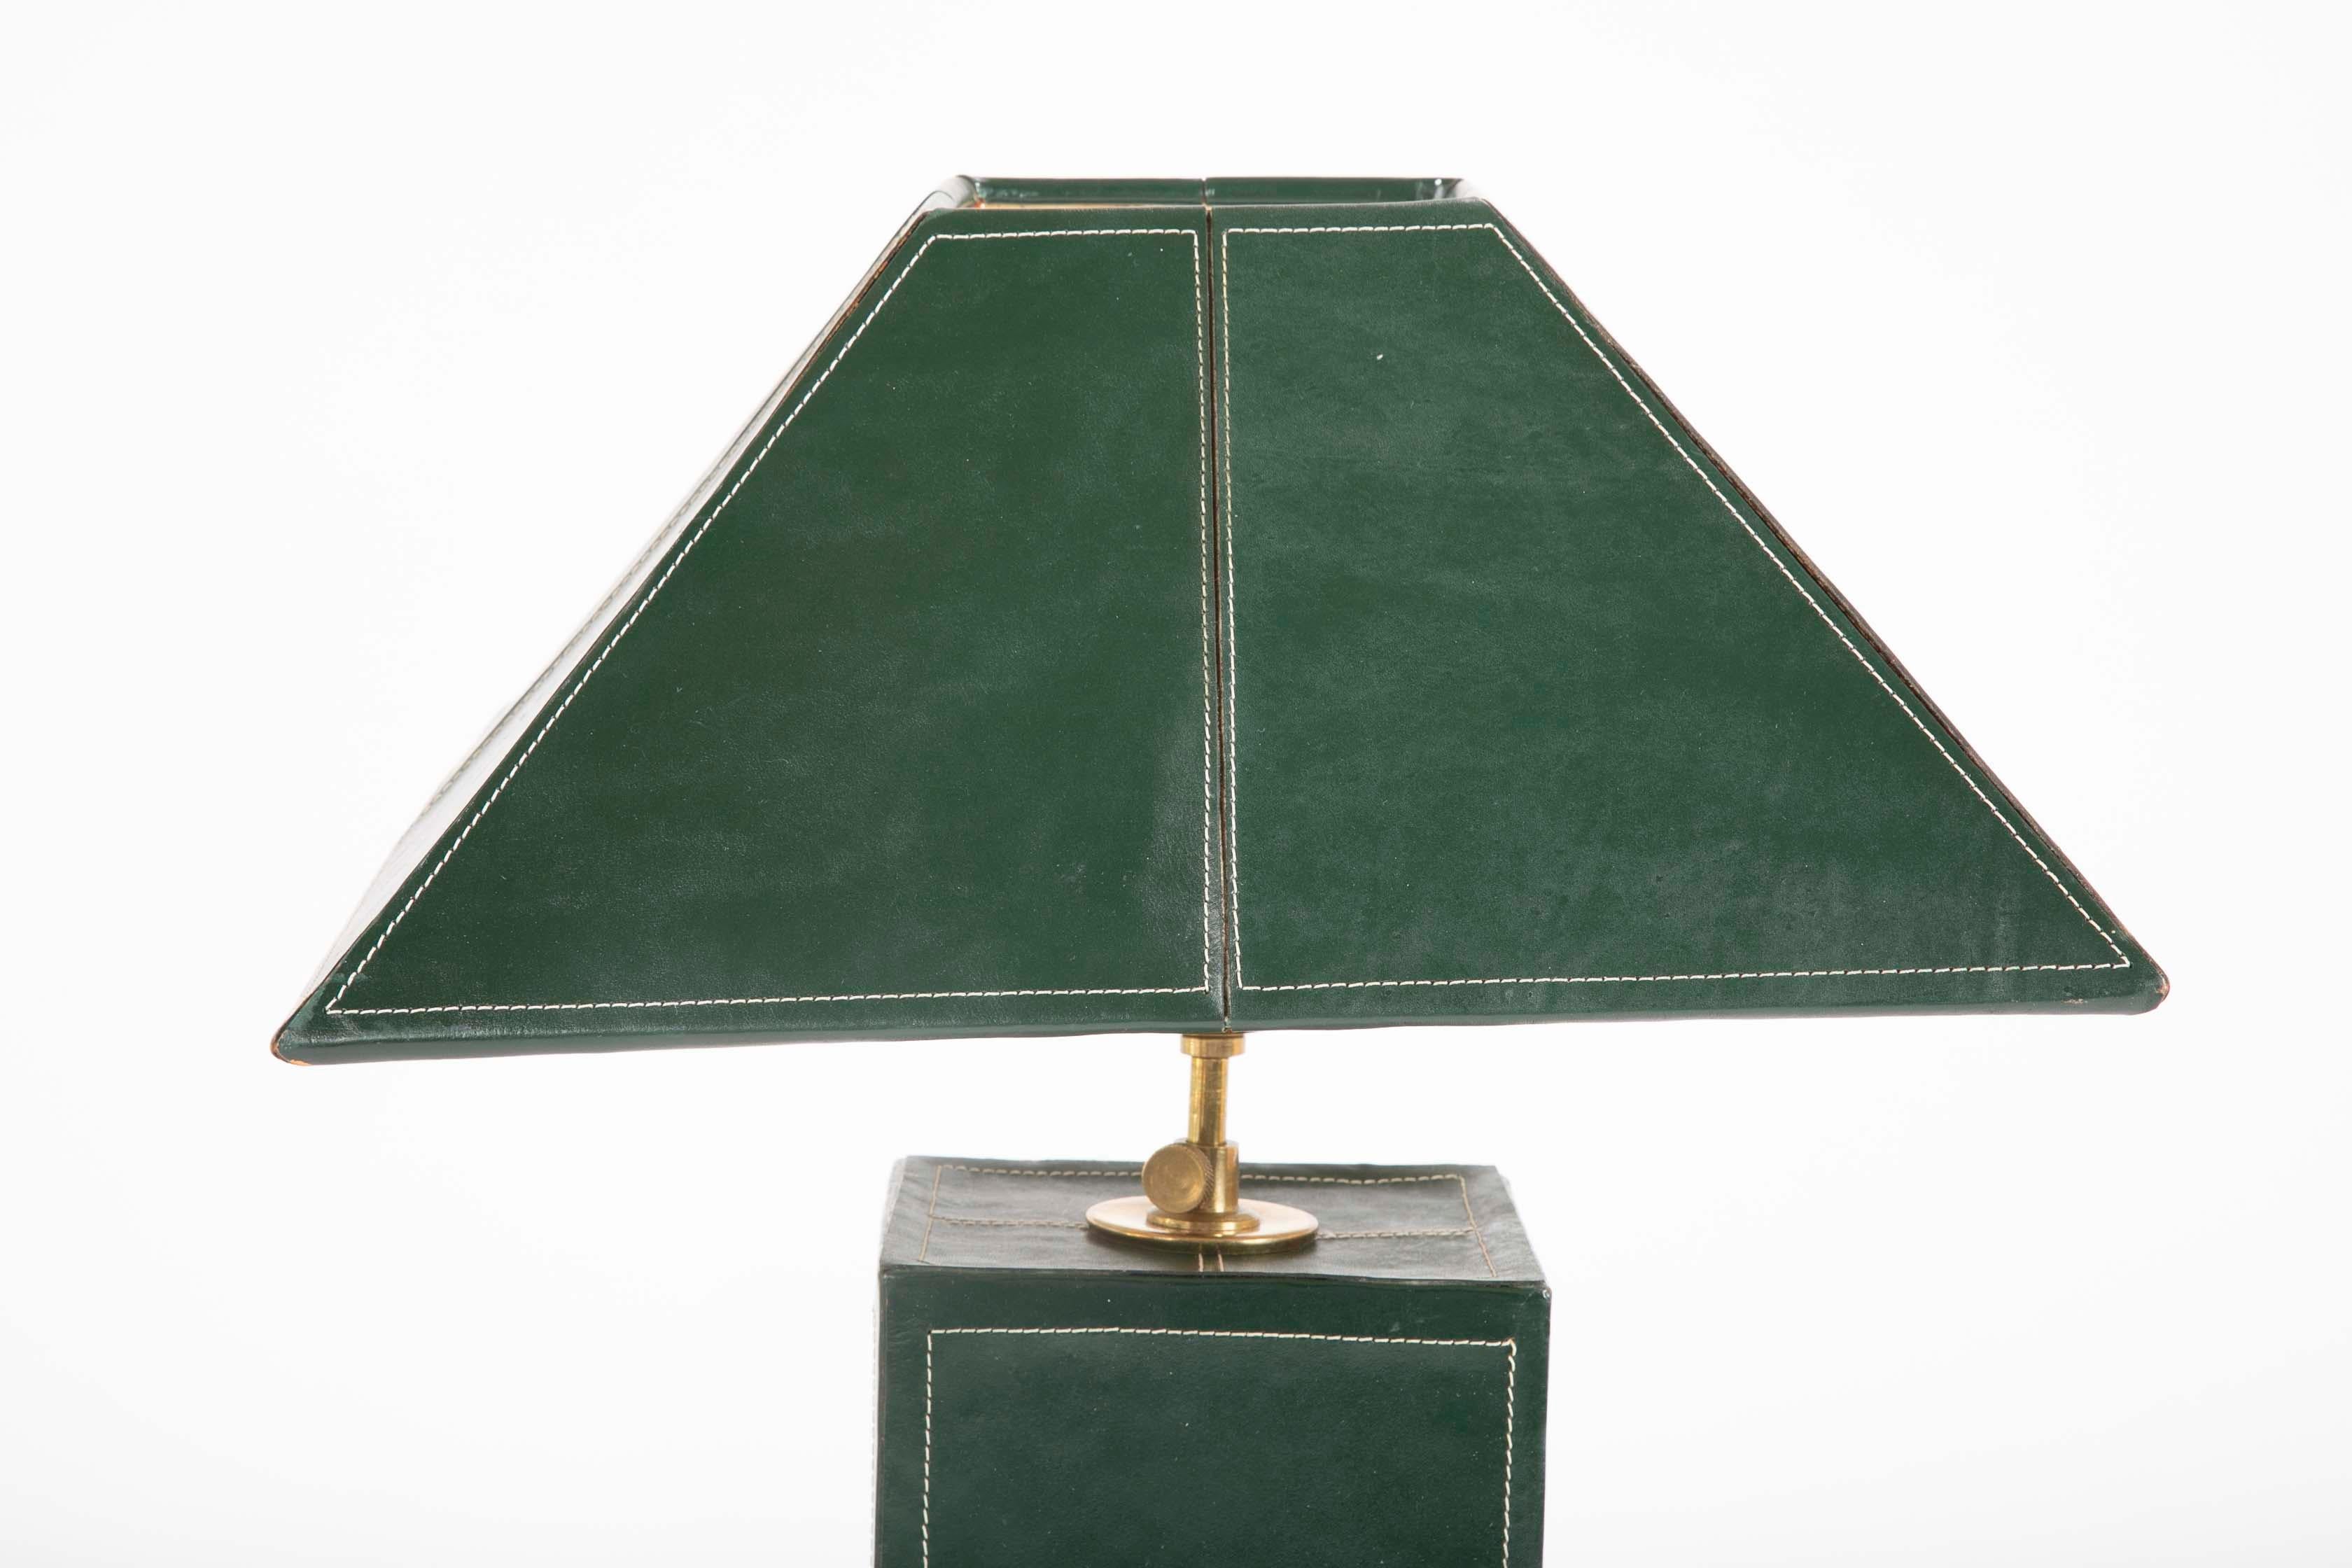 A pair of lamps covered in green leather with white stitching in the manner of Jacques Adnet.